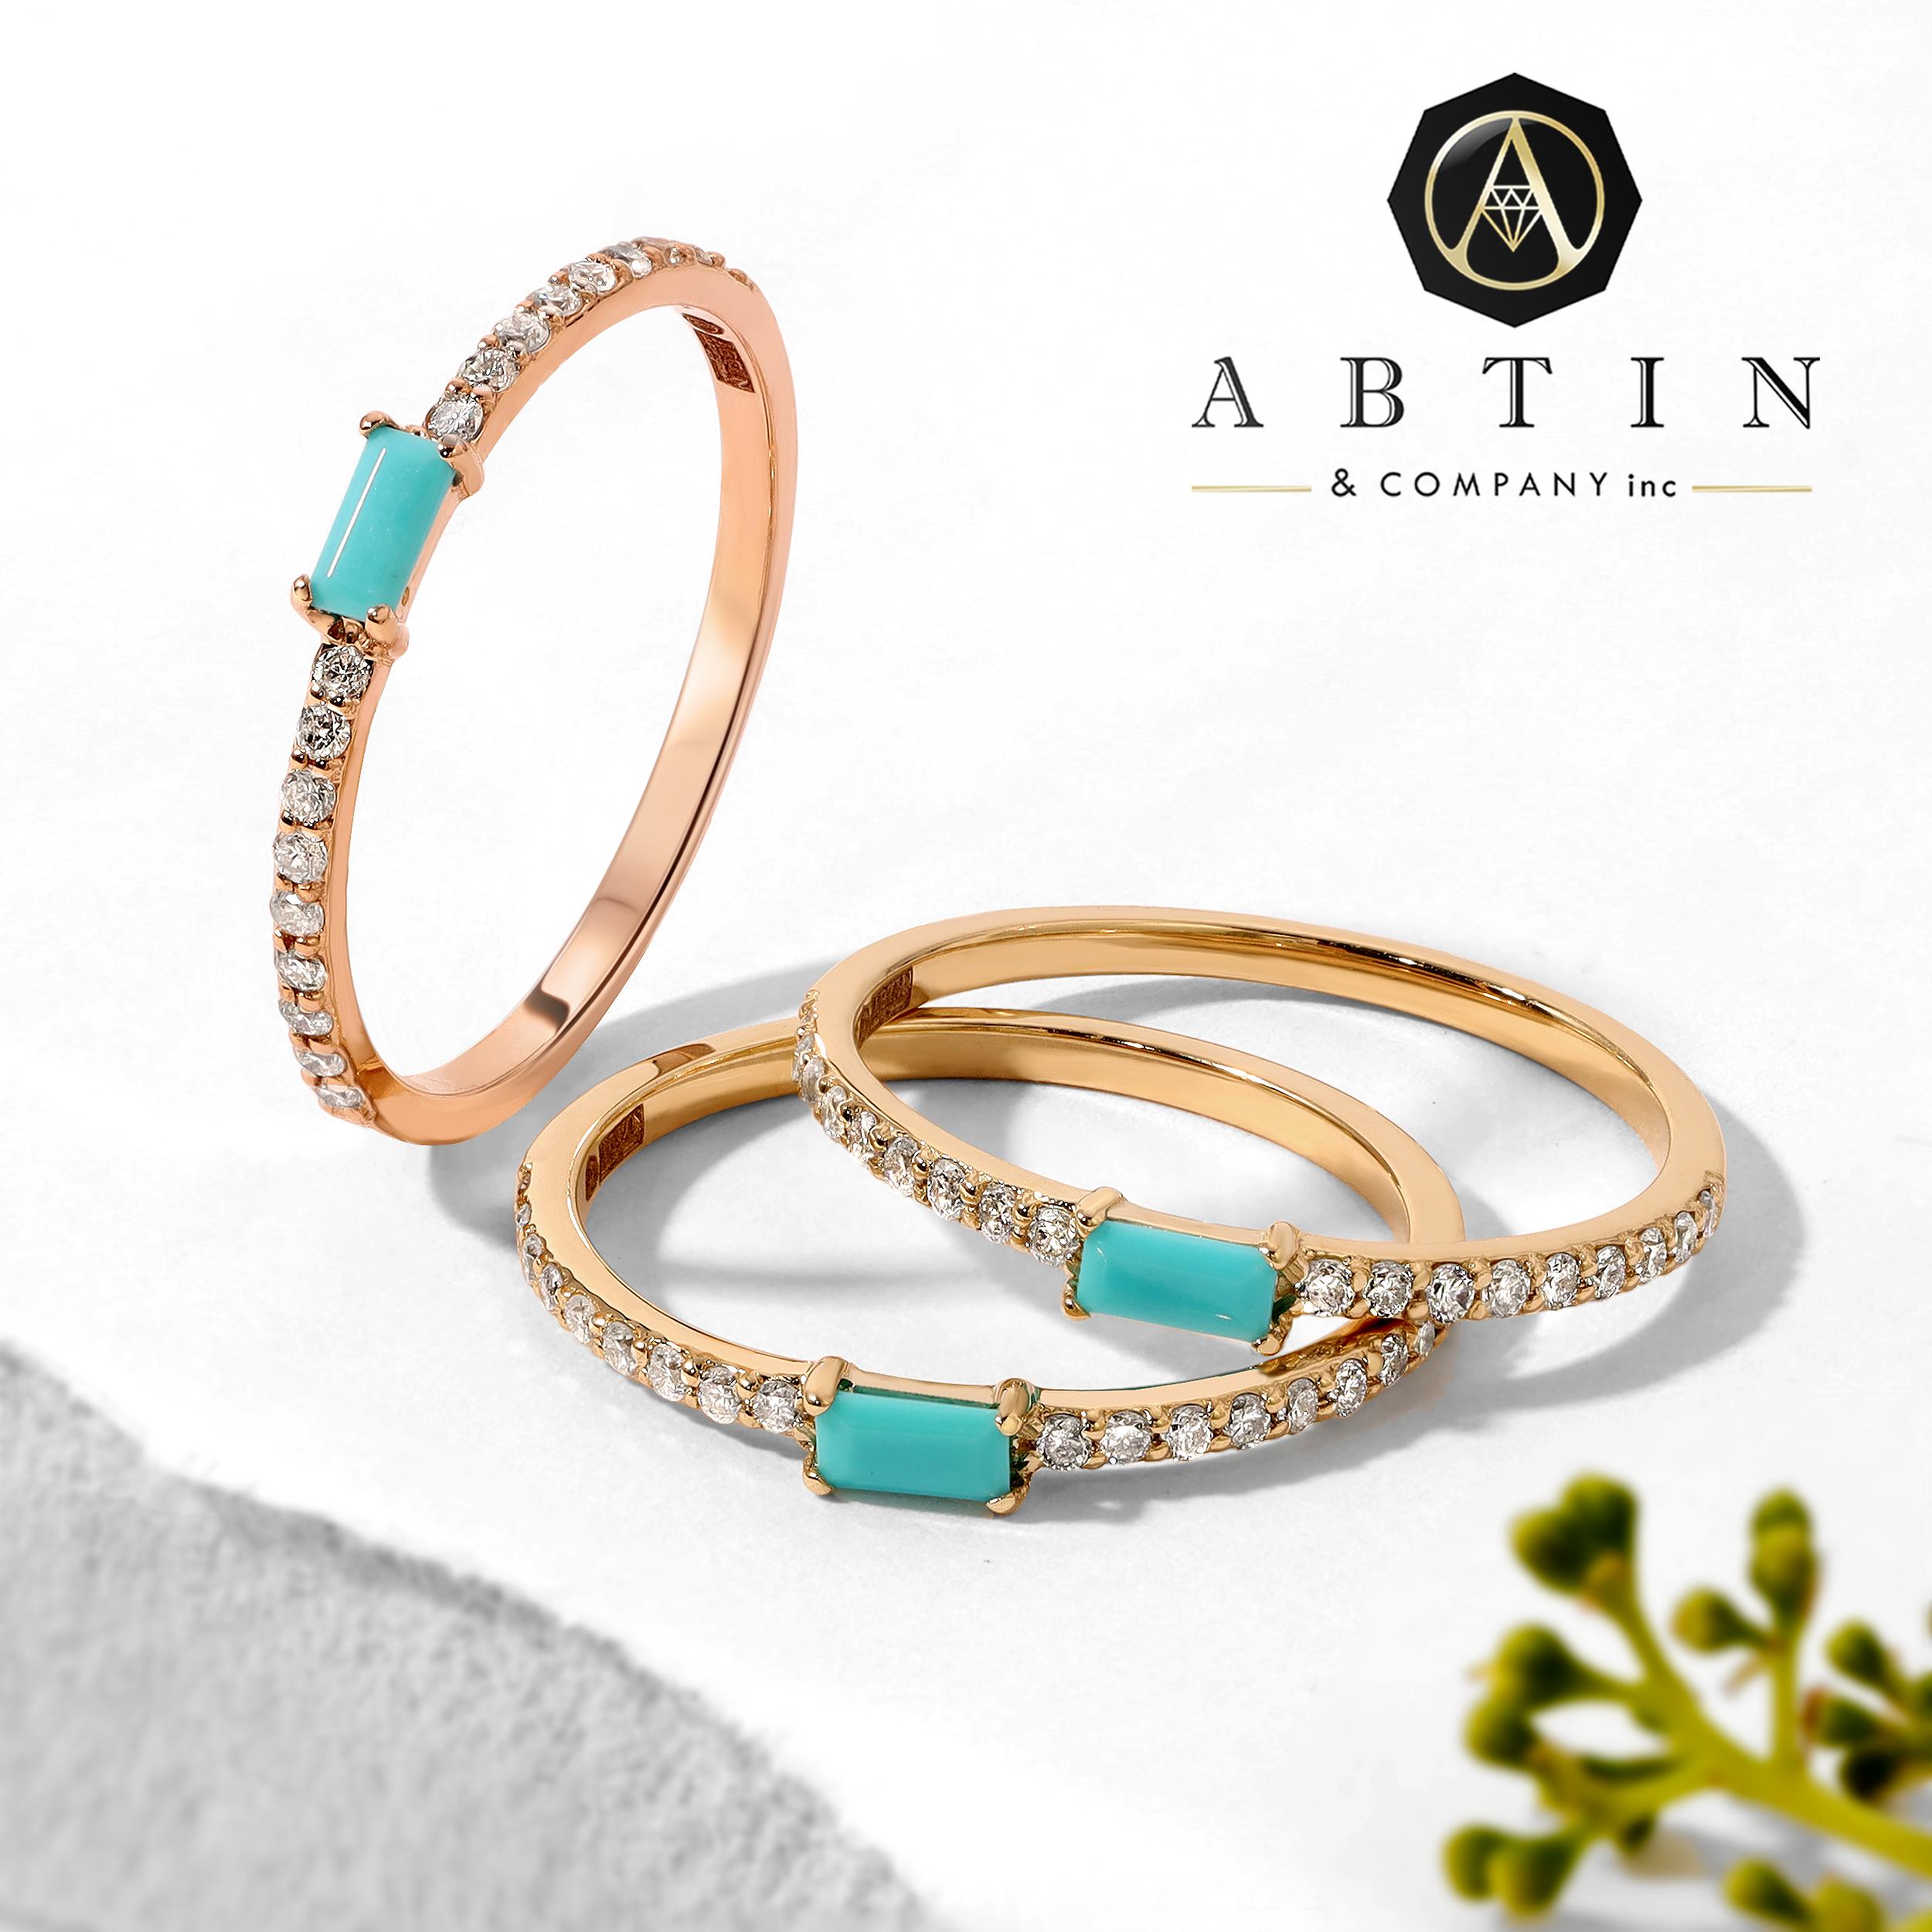 Crafted in 14K gold, this delicate ring has a centerpiece of baguette-shaped genuine turquoise surrounded with gleaming round diamonds. Stunning when worn alone or when paired with your favorite stack.
Key Points:
Gold Weight: 1.20 gr
Diamond